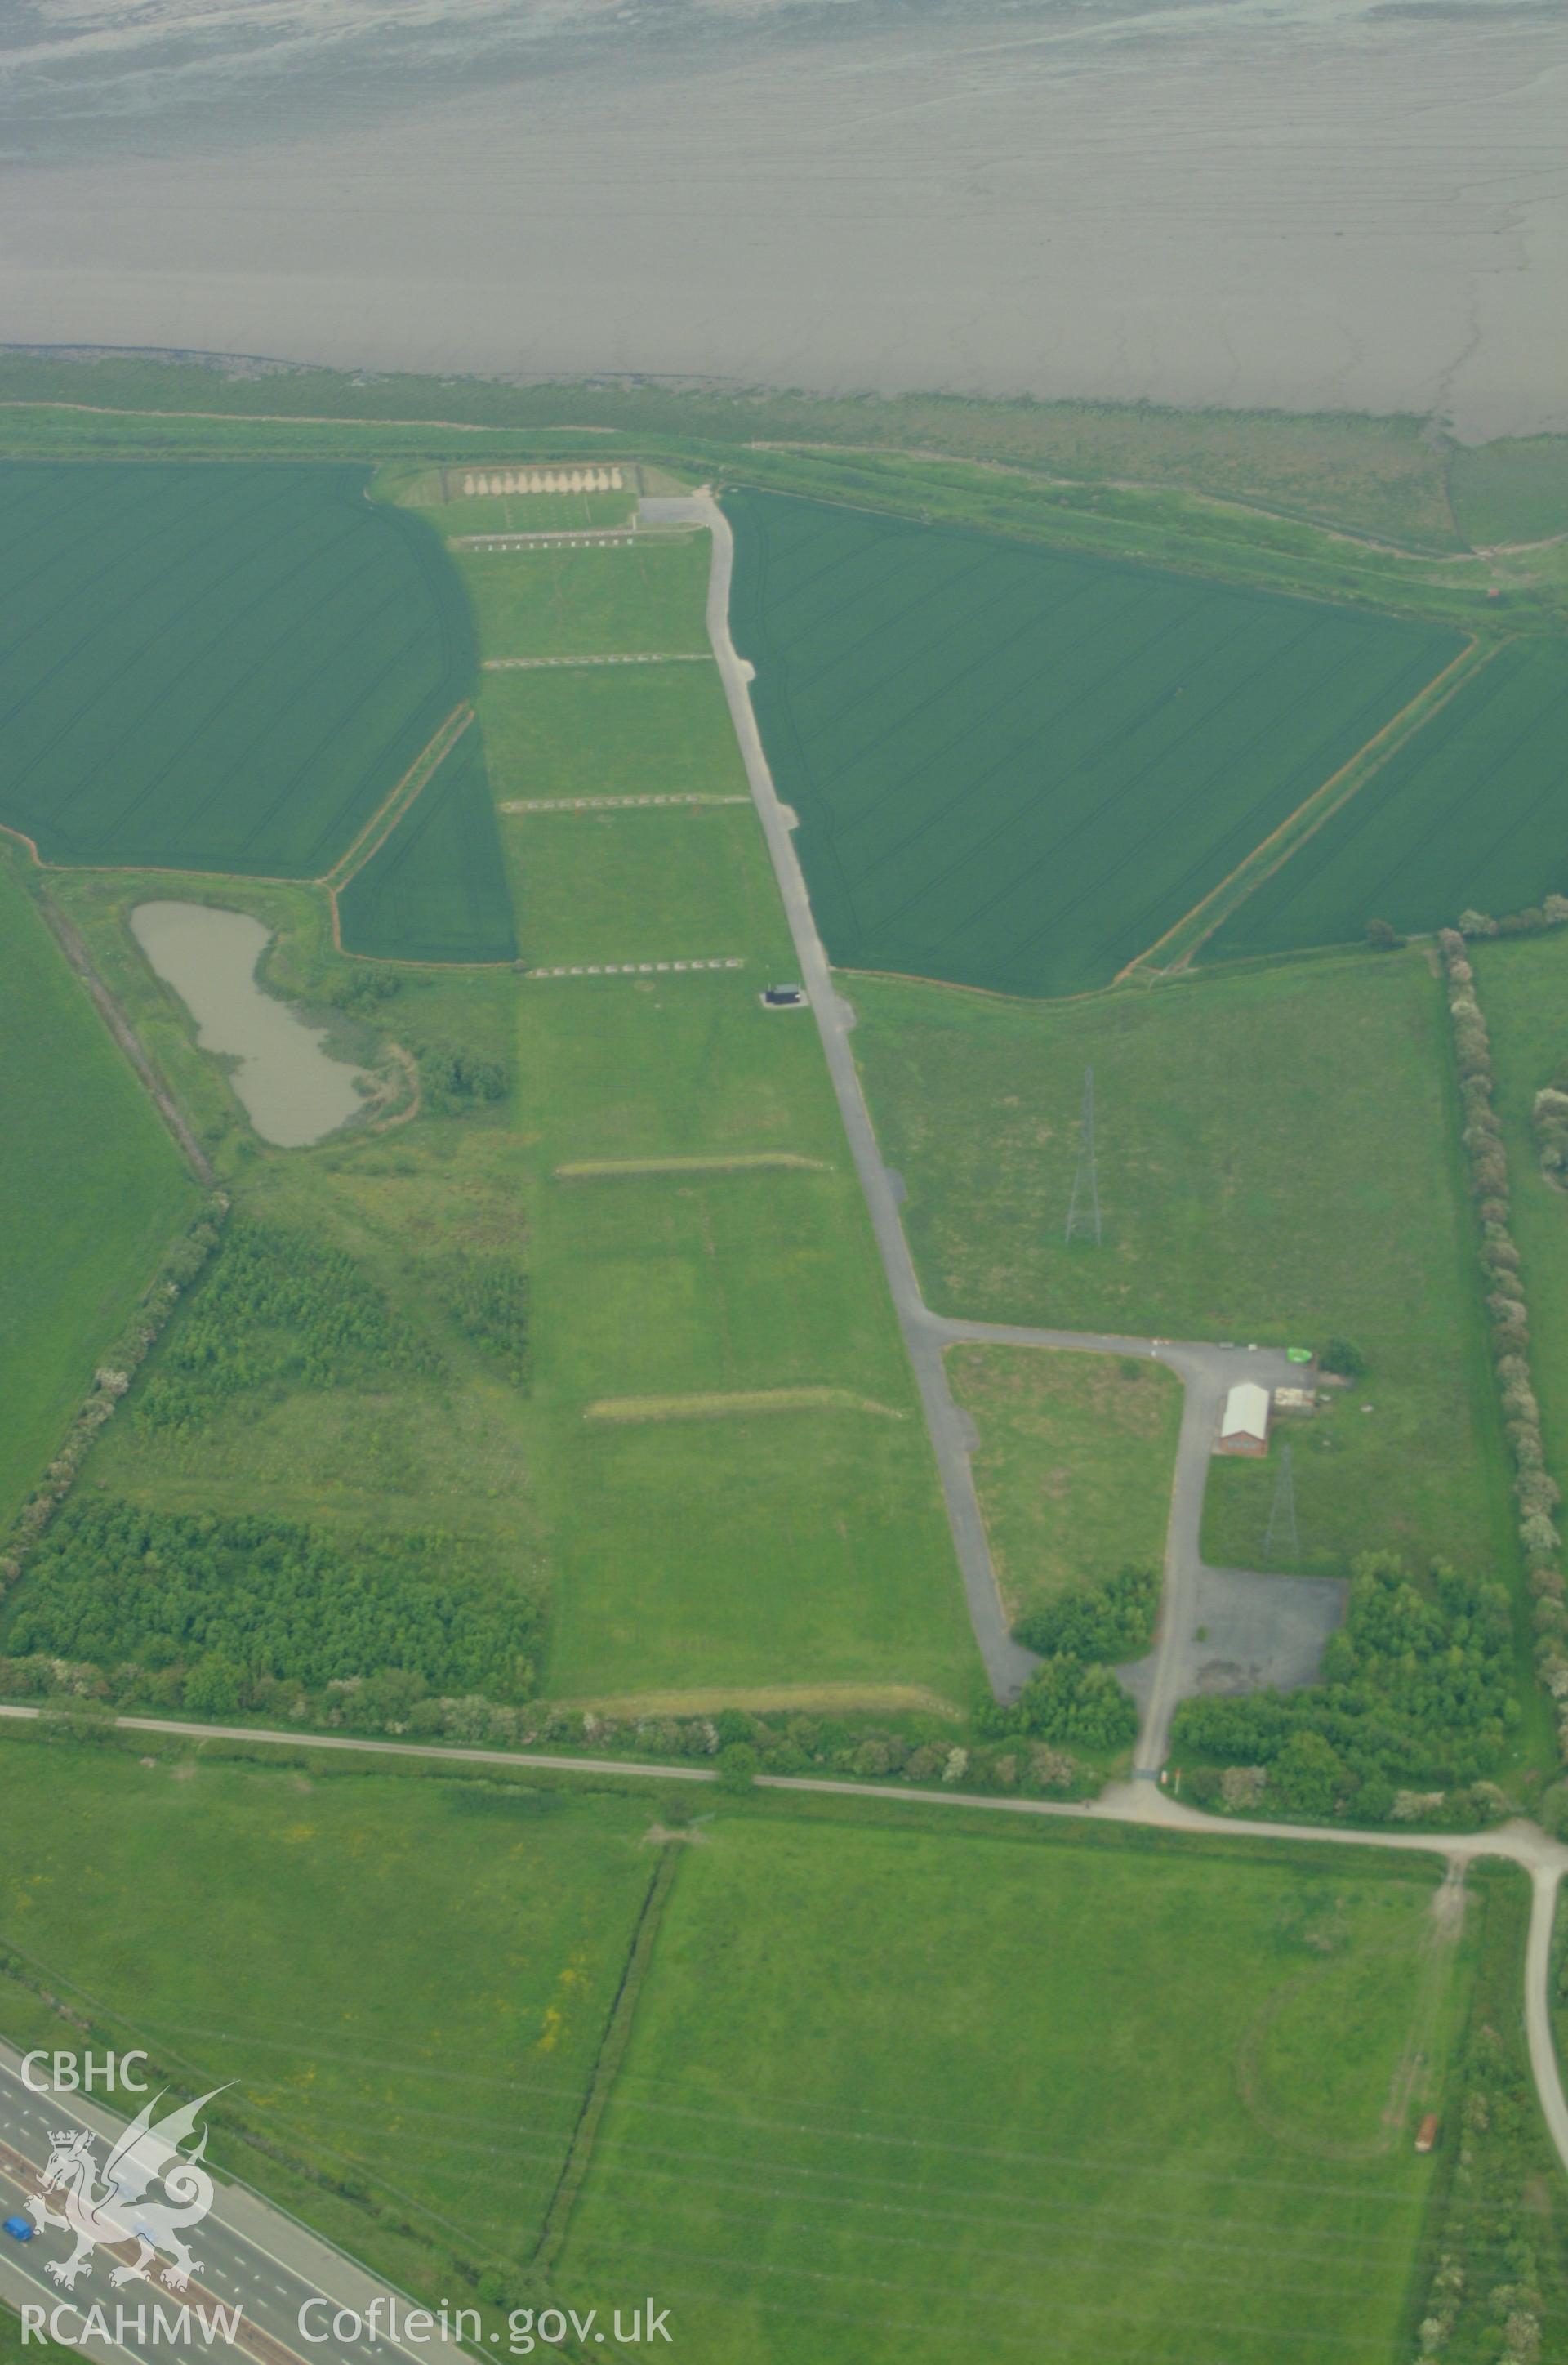 RCAHMW colour oblique aerial photograph of Rogiet Rifle Range taken on 27/05/2004 by Toby Driver